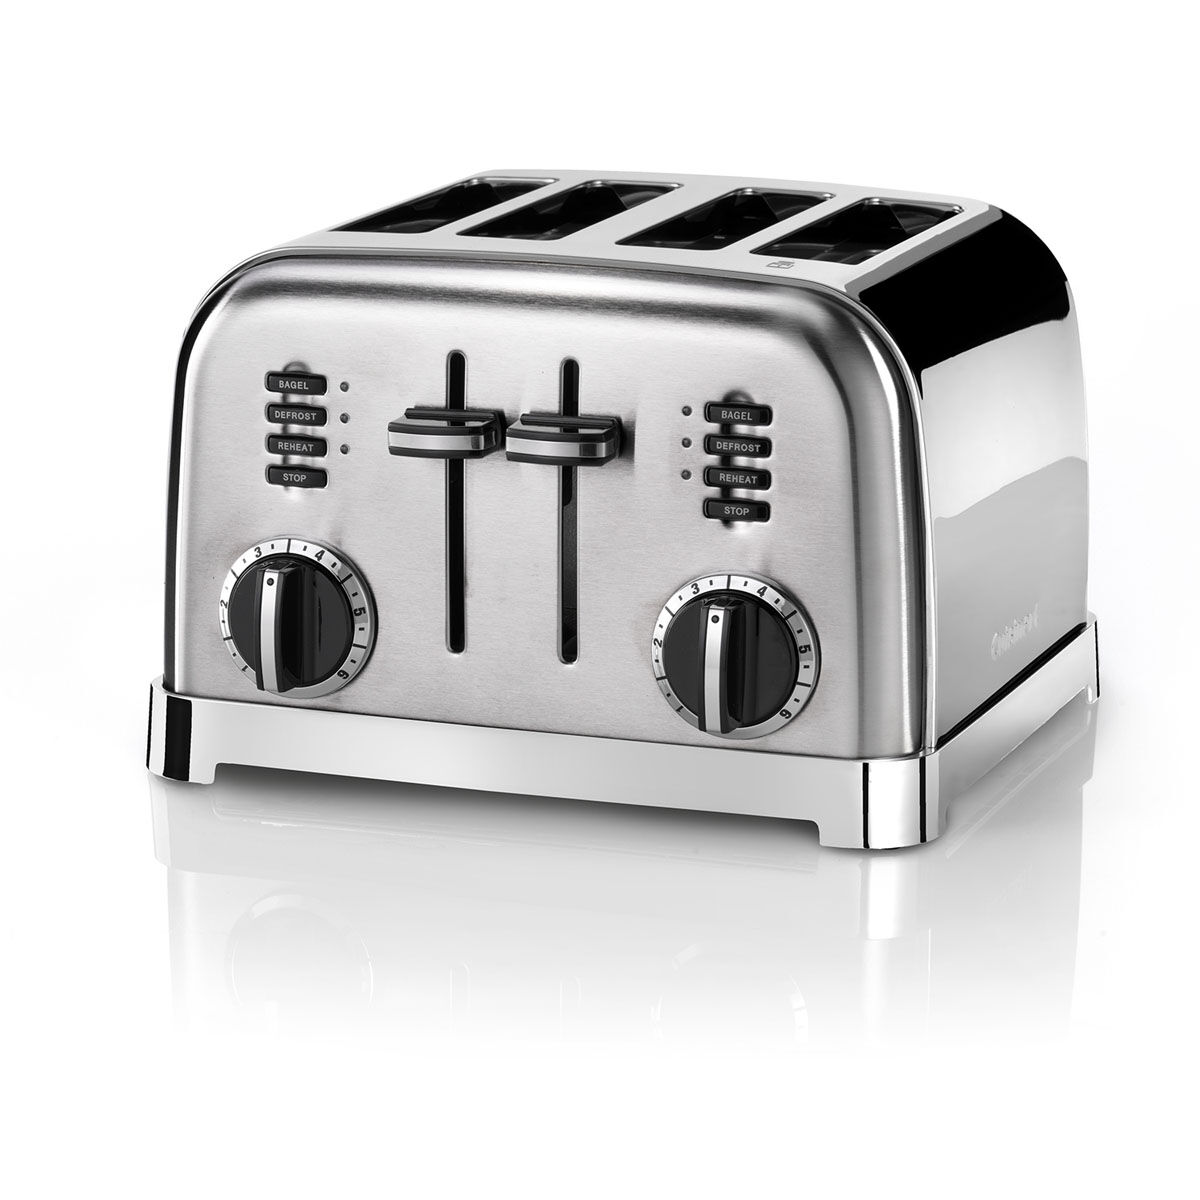 Cuisinart Signature Collection 4 Slice Toaster Review